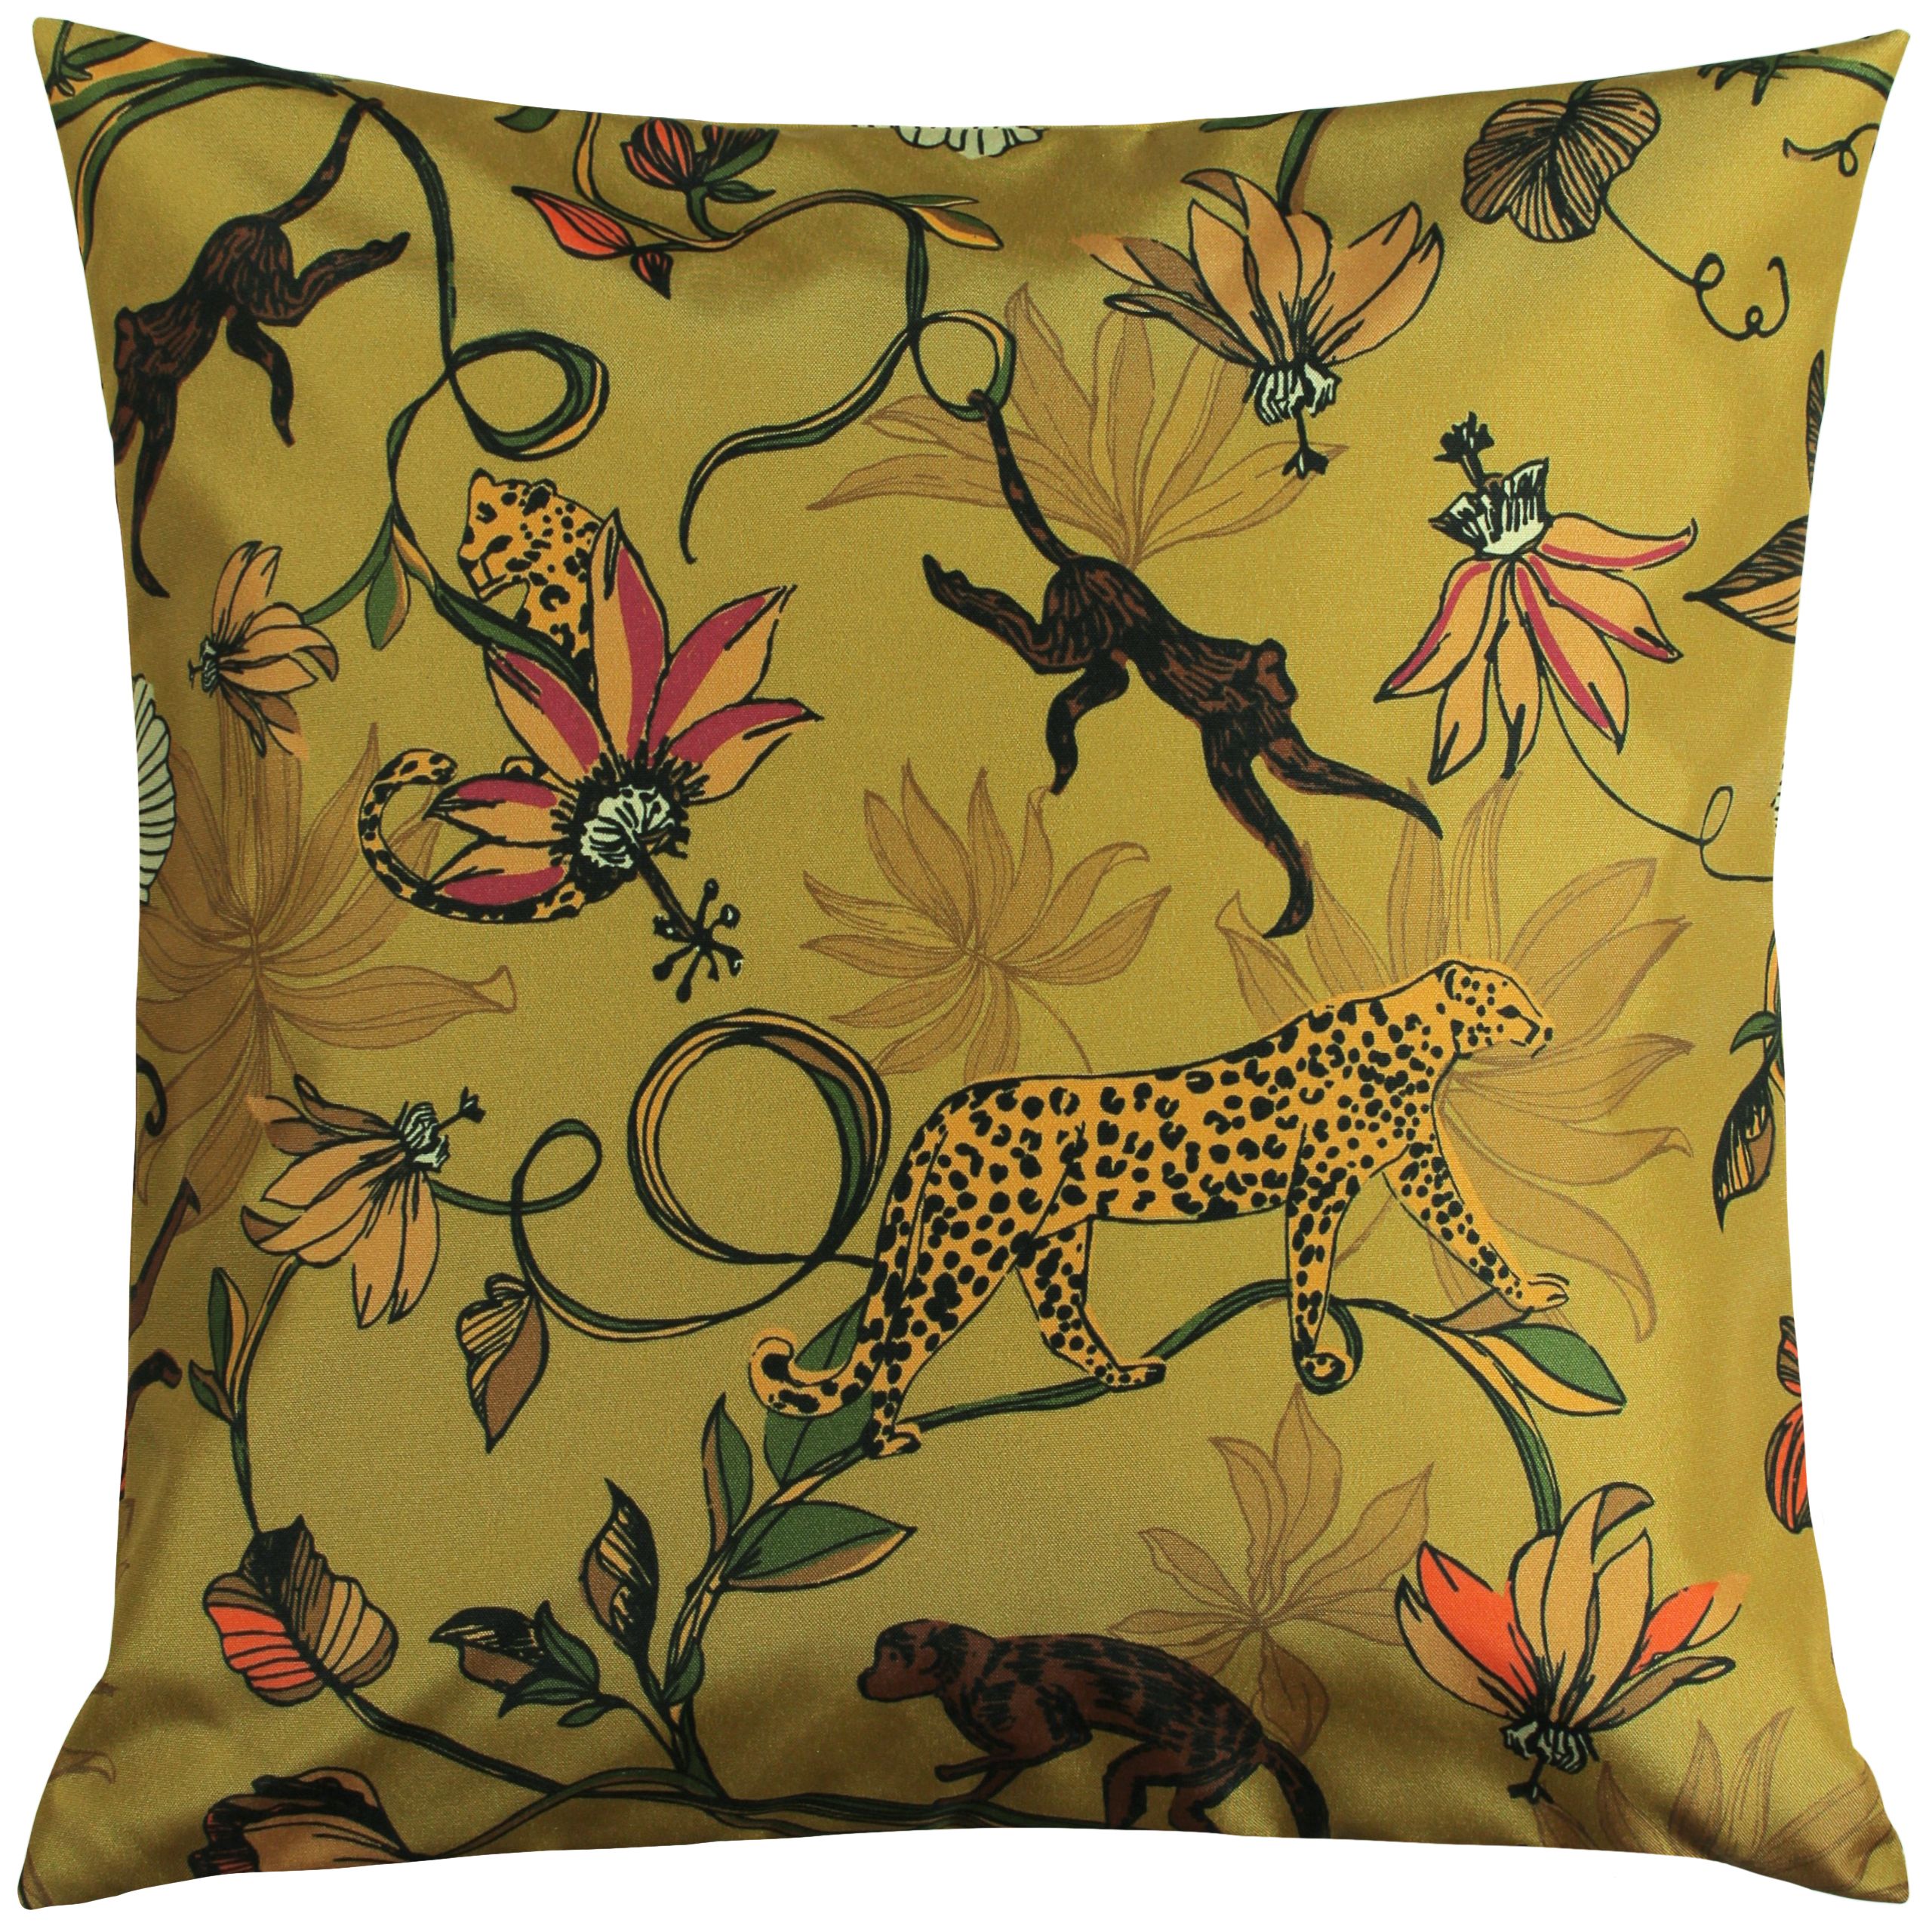 Add drama to your garden with a striking botanical themed cushion. This cushion captures a variety of tropical leaves and flowers in their bright and rich colours. With the main focal point being poised leopards and monkeys, this cushion is a beautiful addition to any outdoor space.